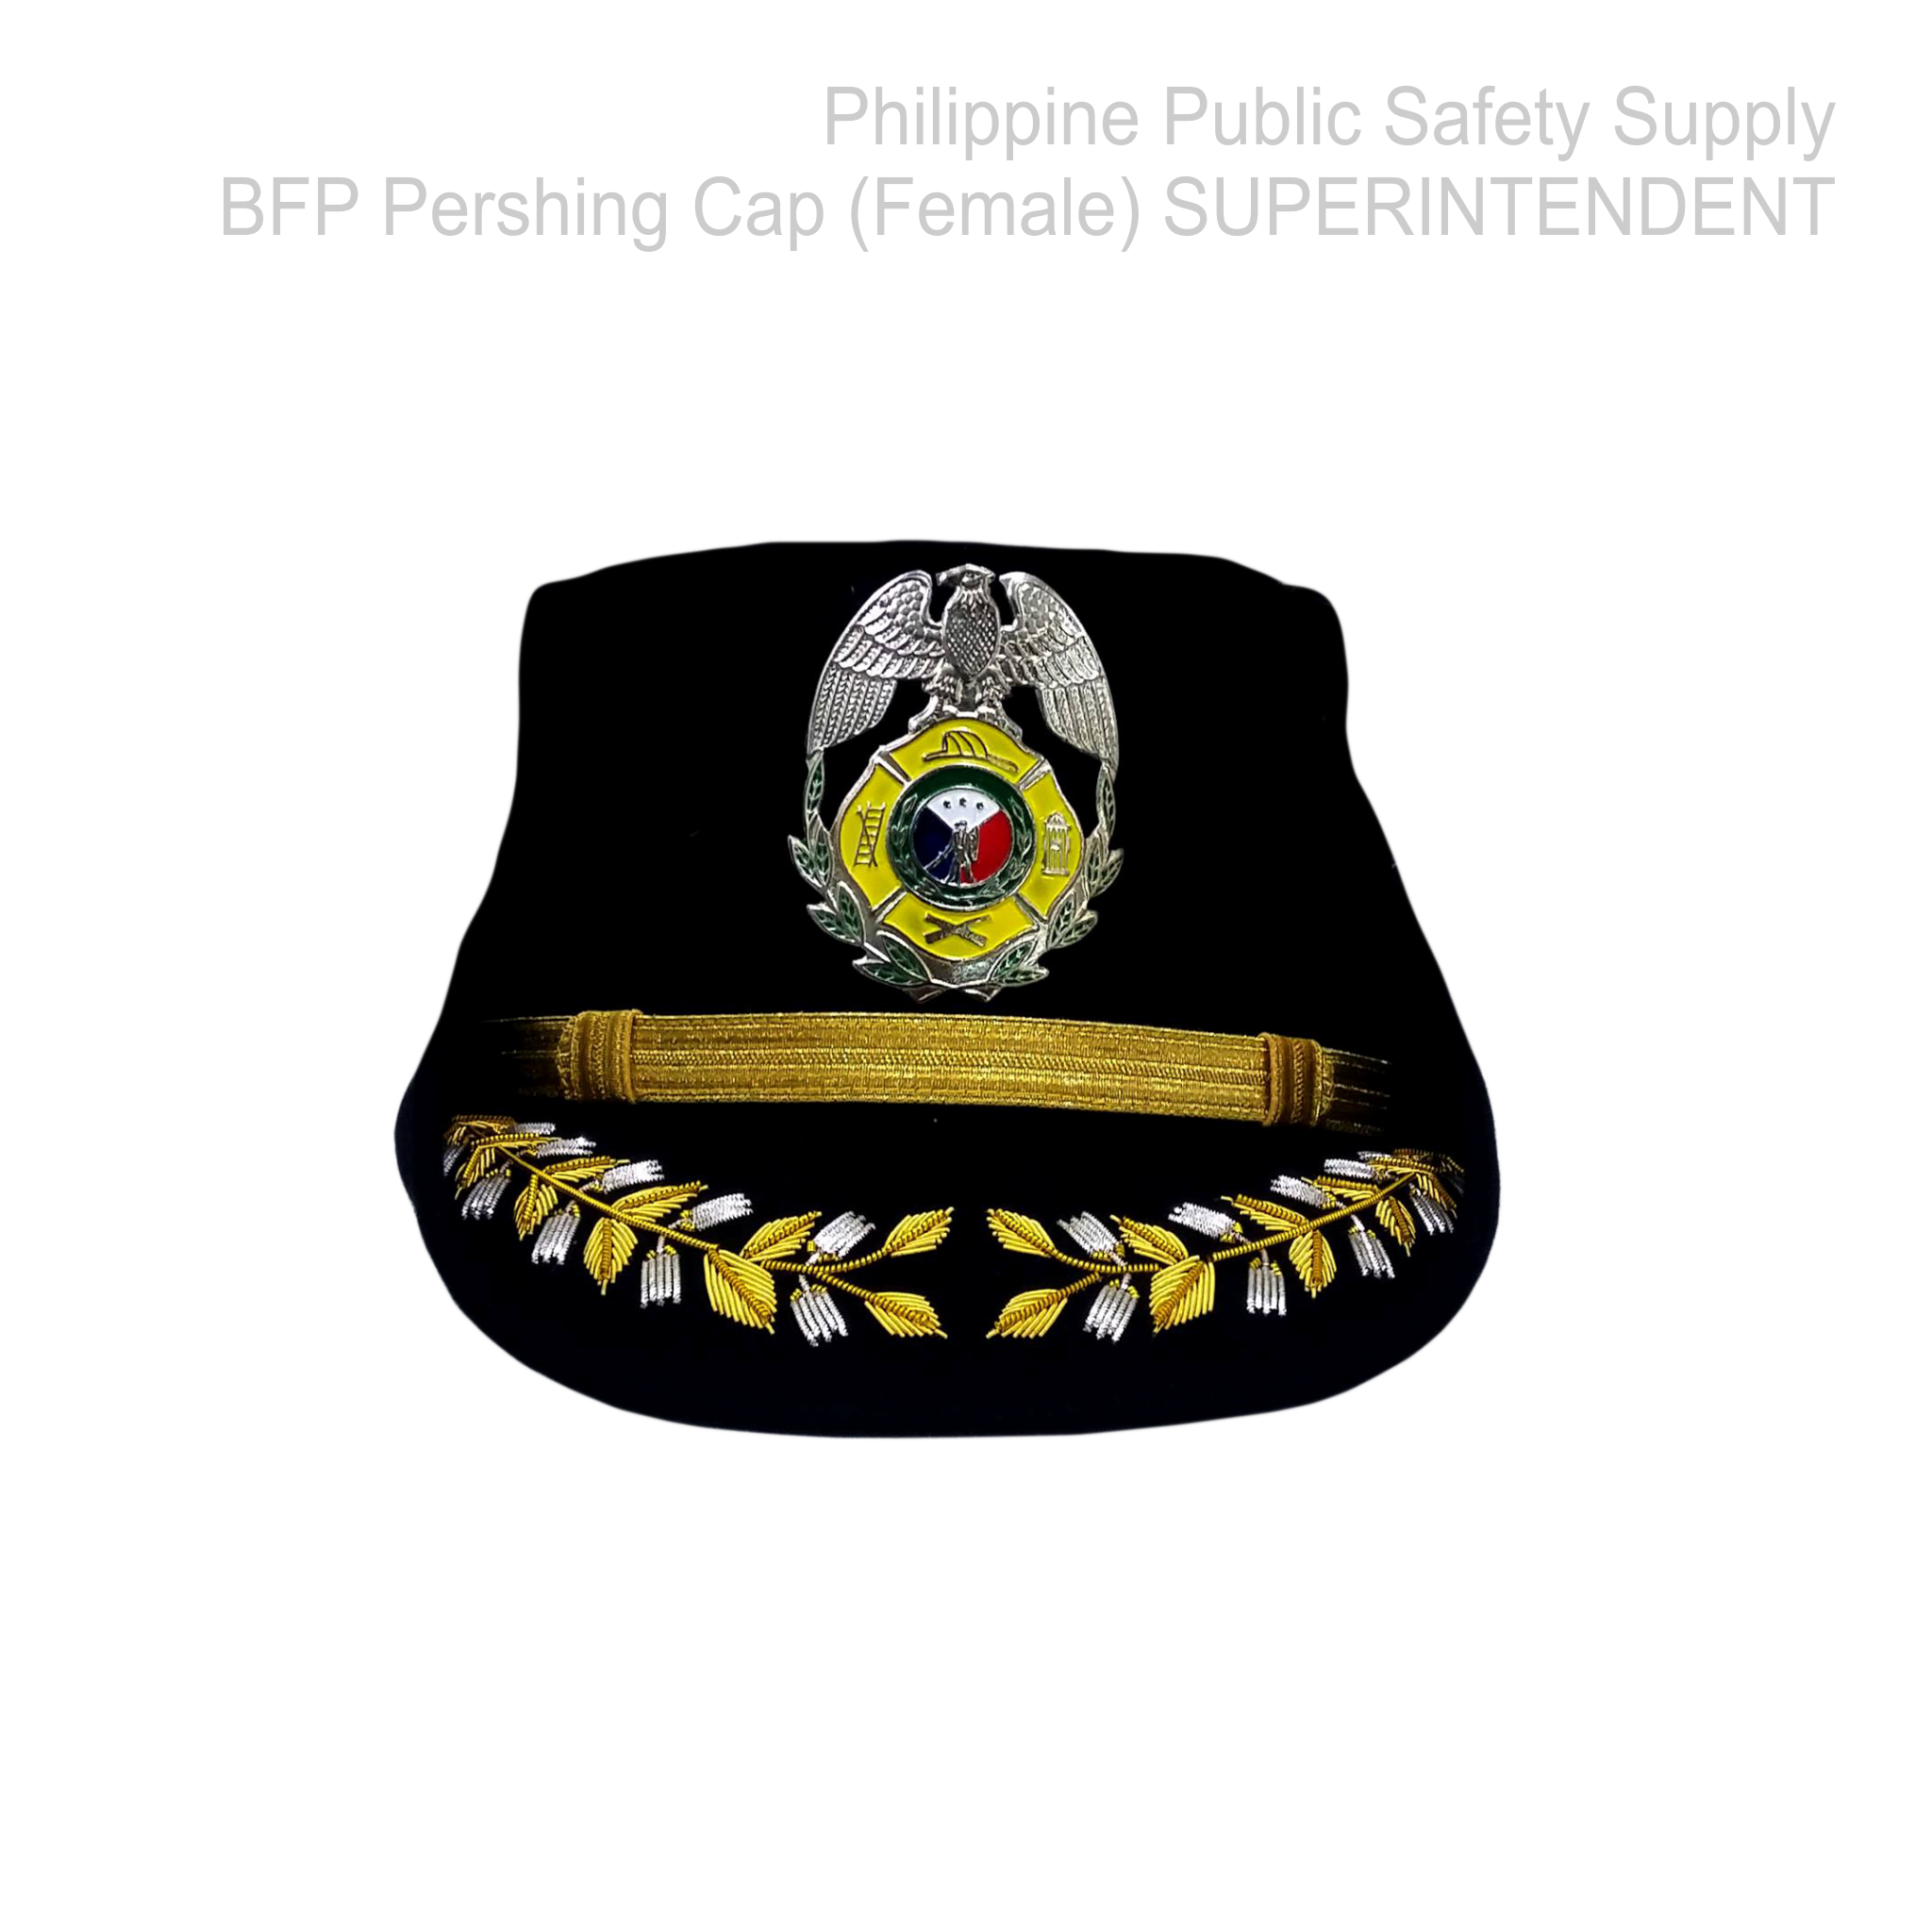 Bureau of Fire Protection (BFP) Pershing Cap (Female) Superintendent - BFP